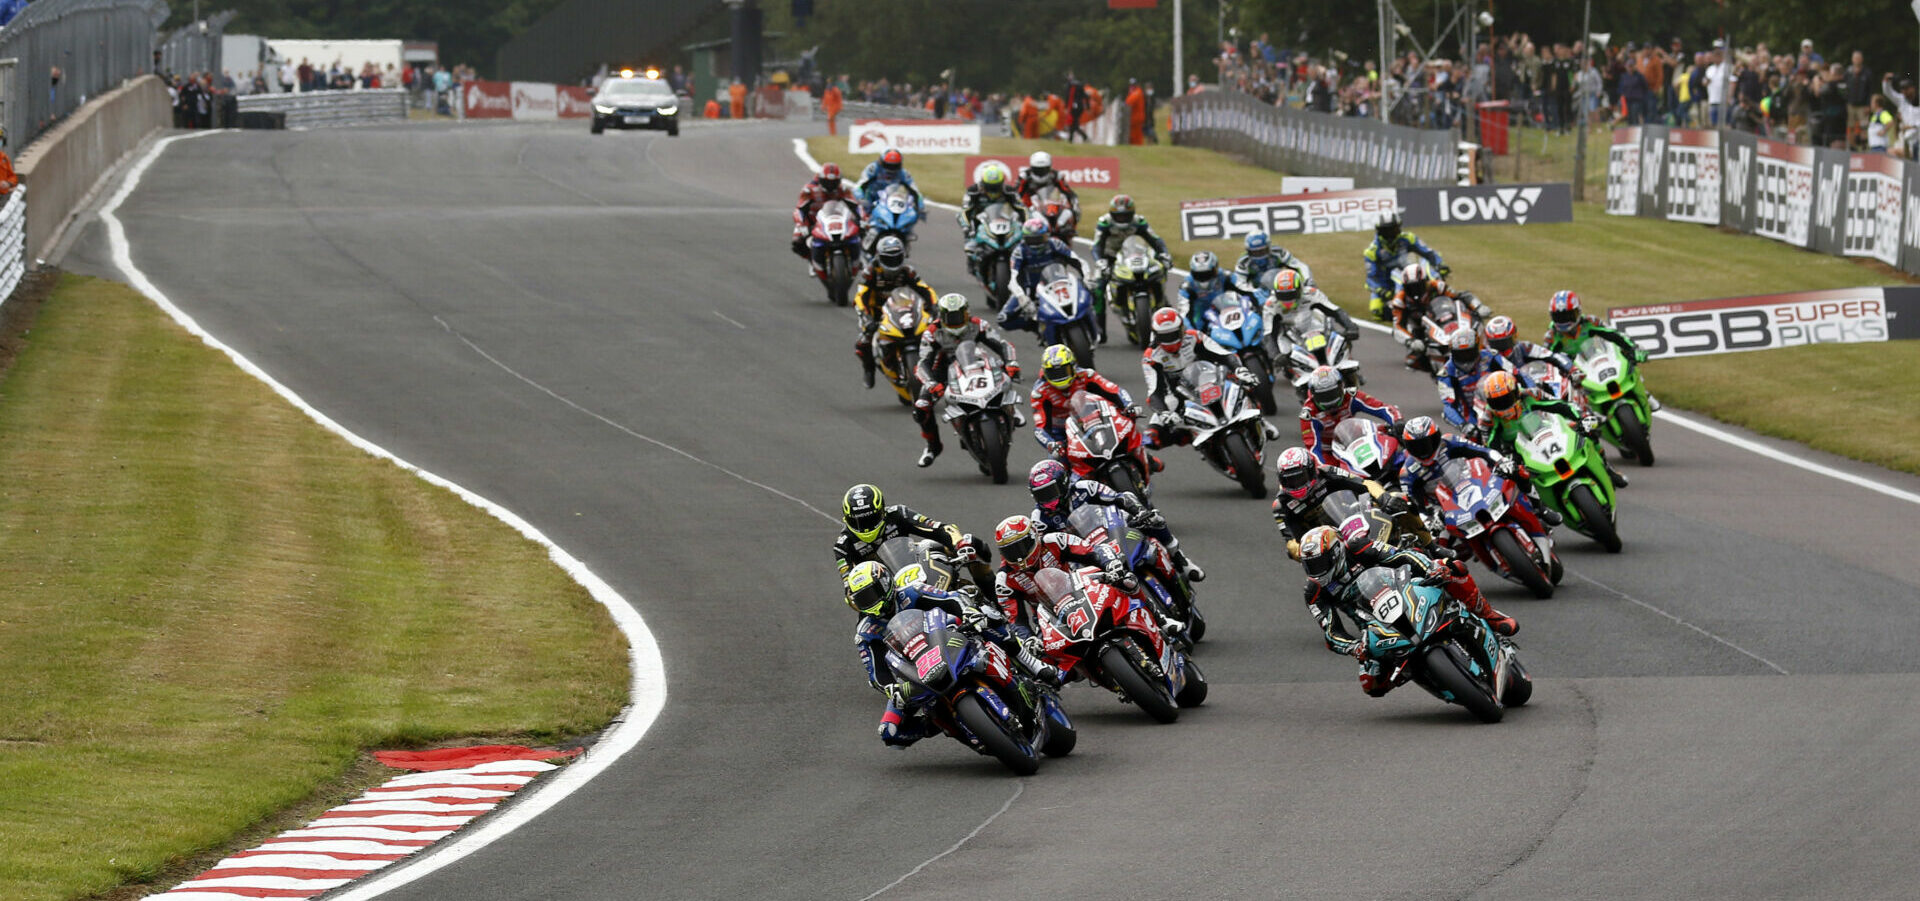 The start of a British Superbike race at Oulton Park in 2021. Photo courtesy MSVR.